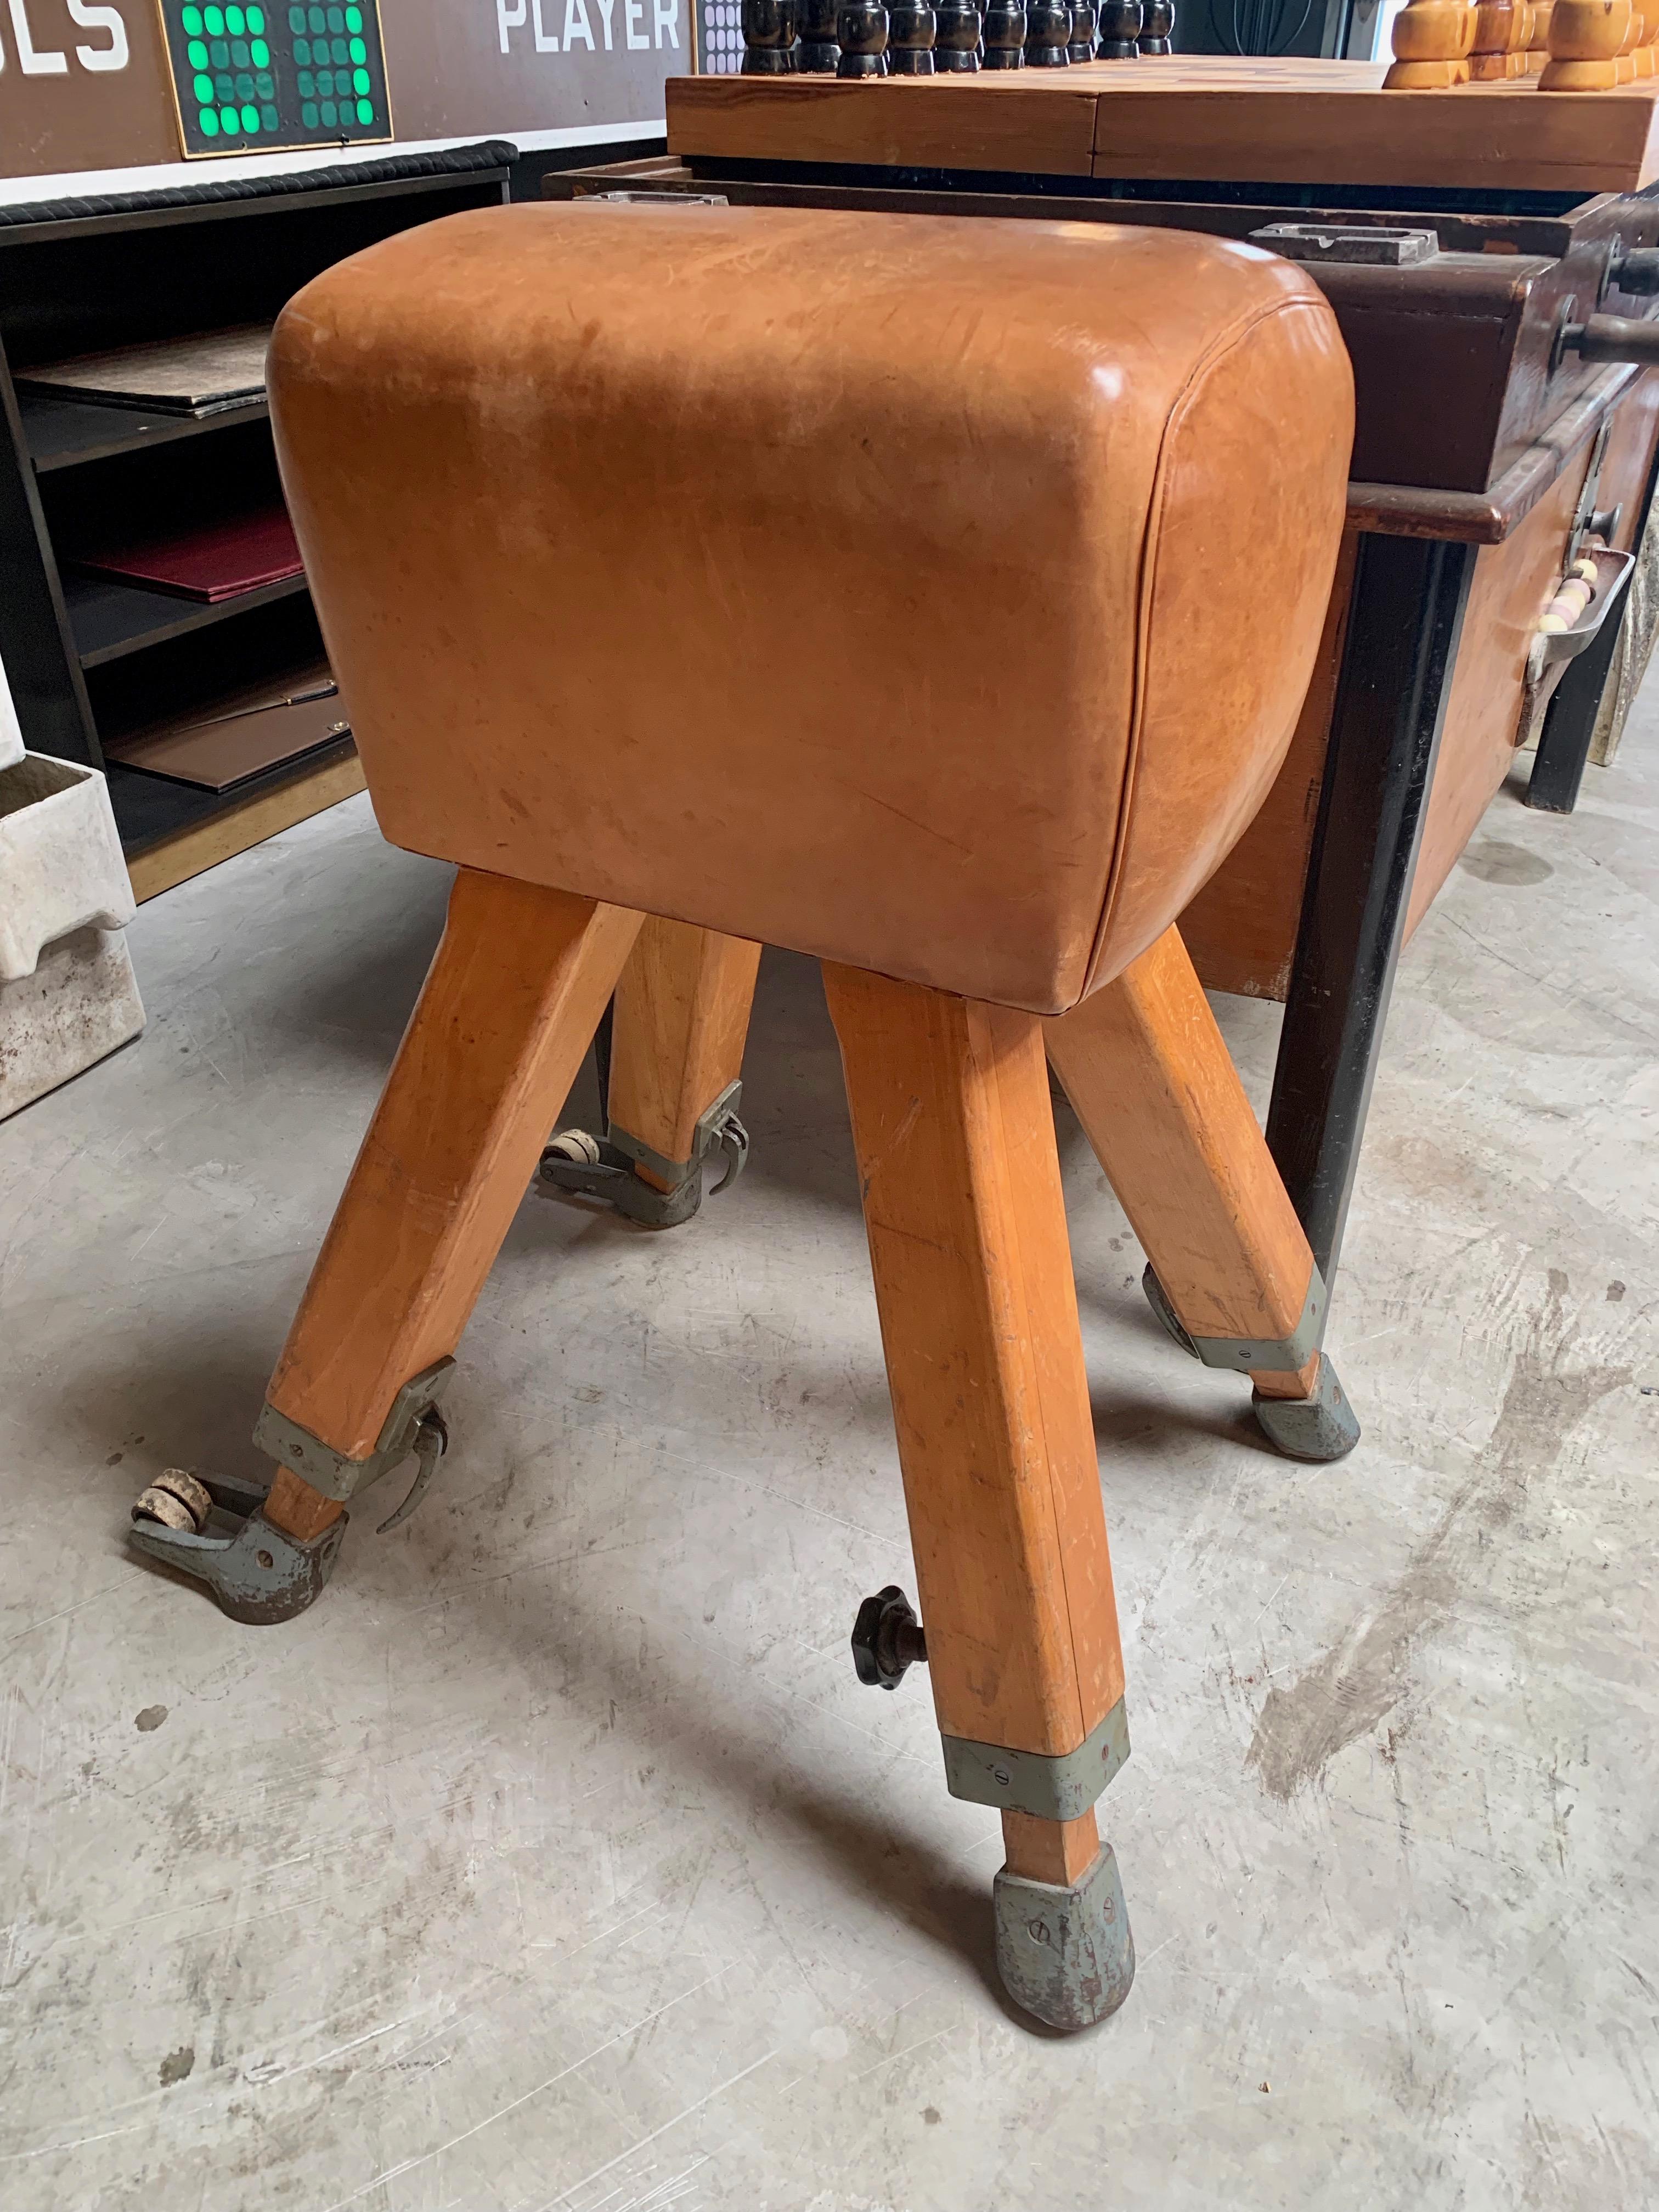 Great vintage leather and beechwood vaulting horse. Adjustable height. Excellent patina and color to leather. Great vintage condition. Great for a gym or eclectic seat.